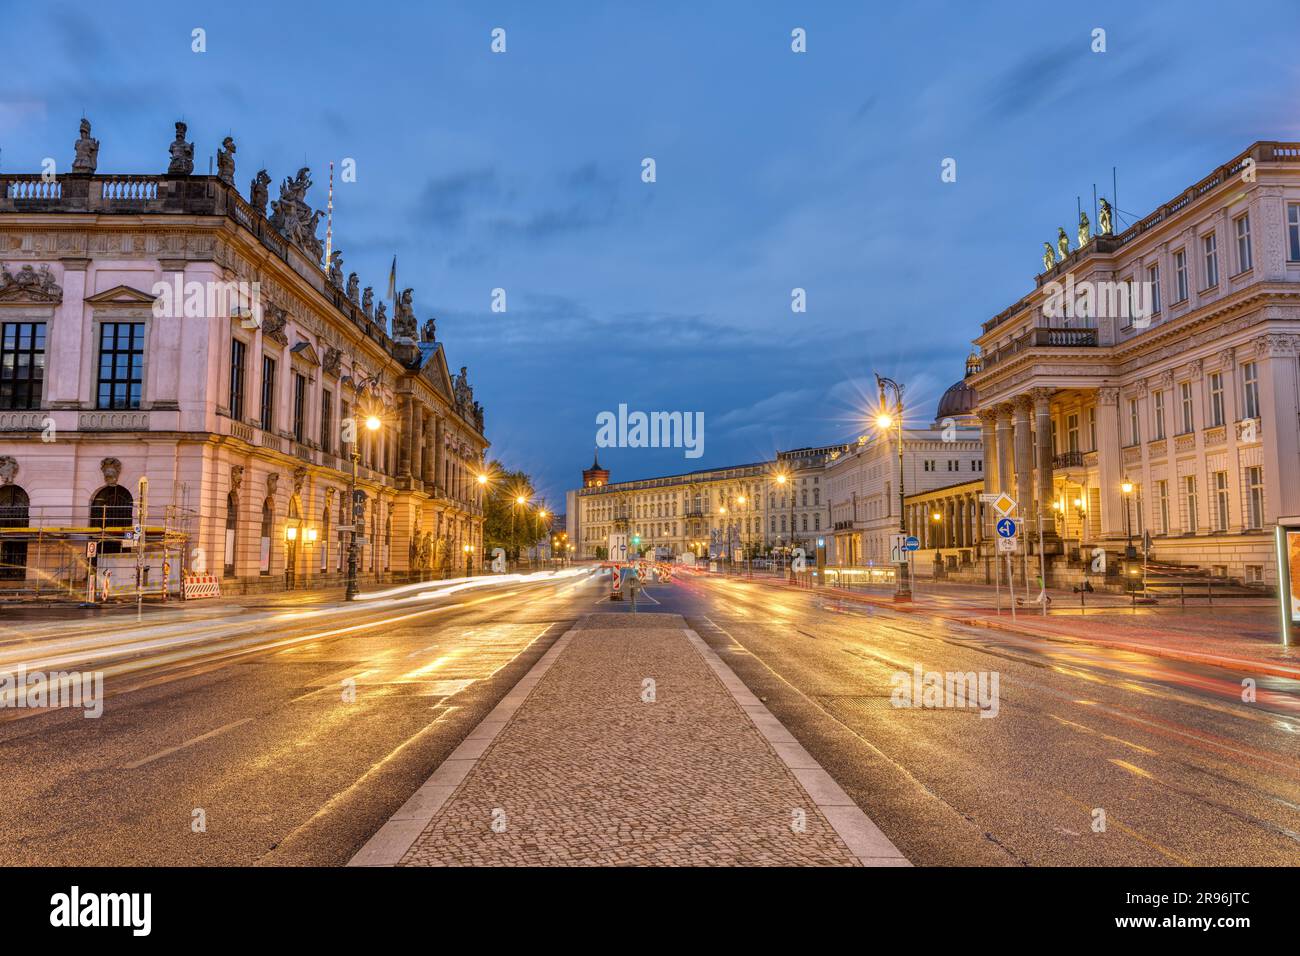 The famous boulevard Unter den Linden in Berlin with its historic buildings at night Stock Photo